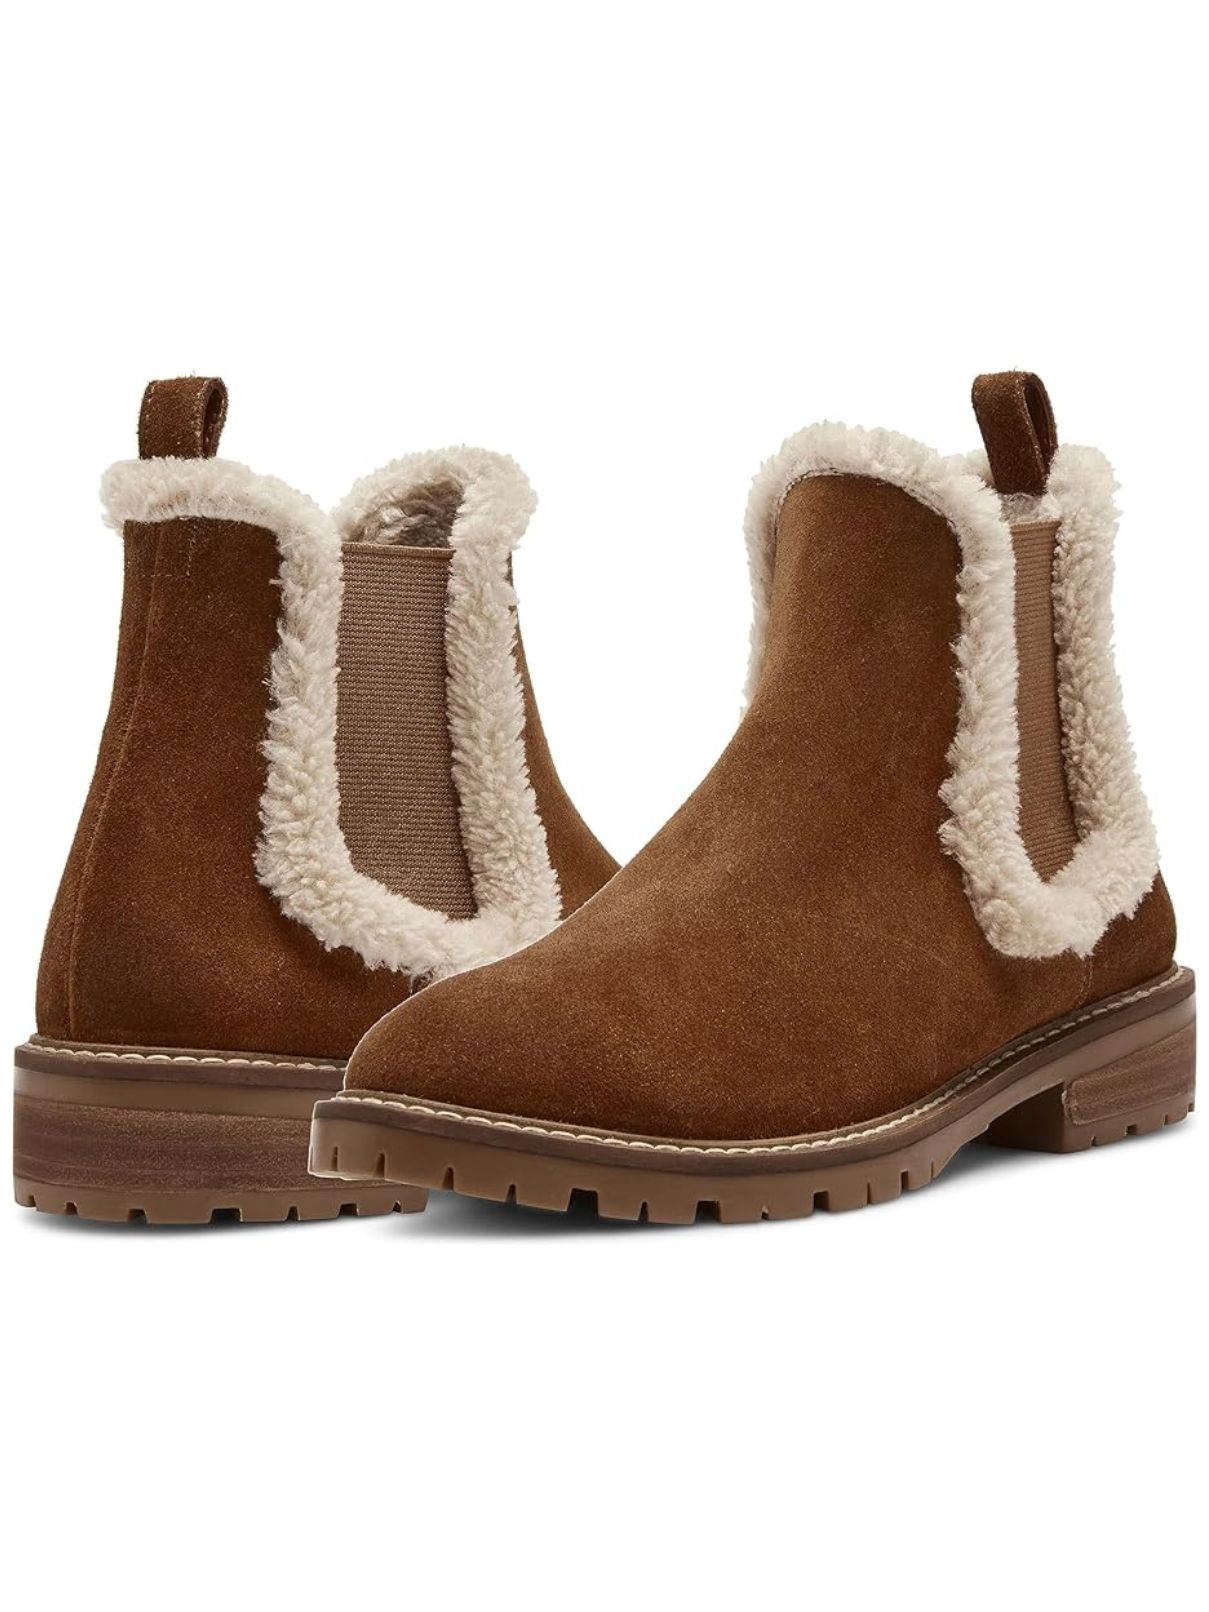 Steve Madden Leopold-F Fur Boot in Camel Suede | Cotton Island